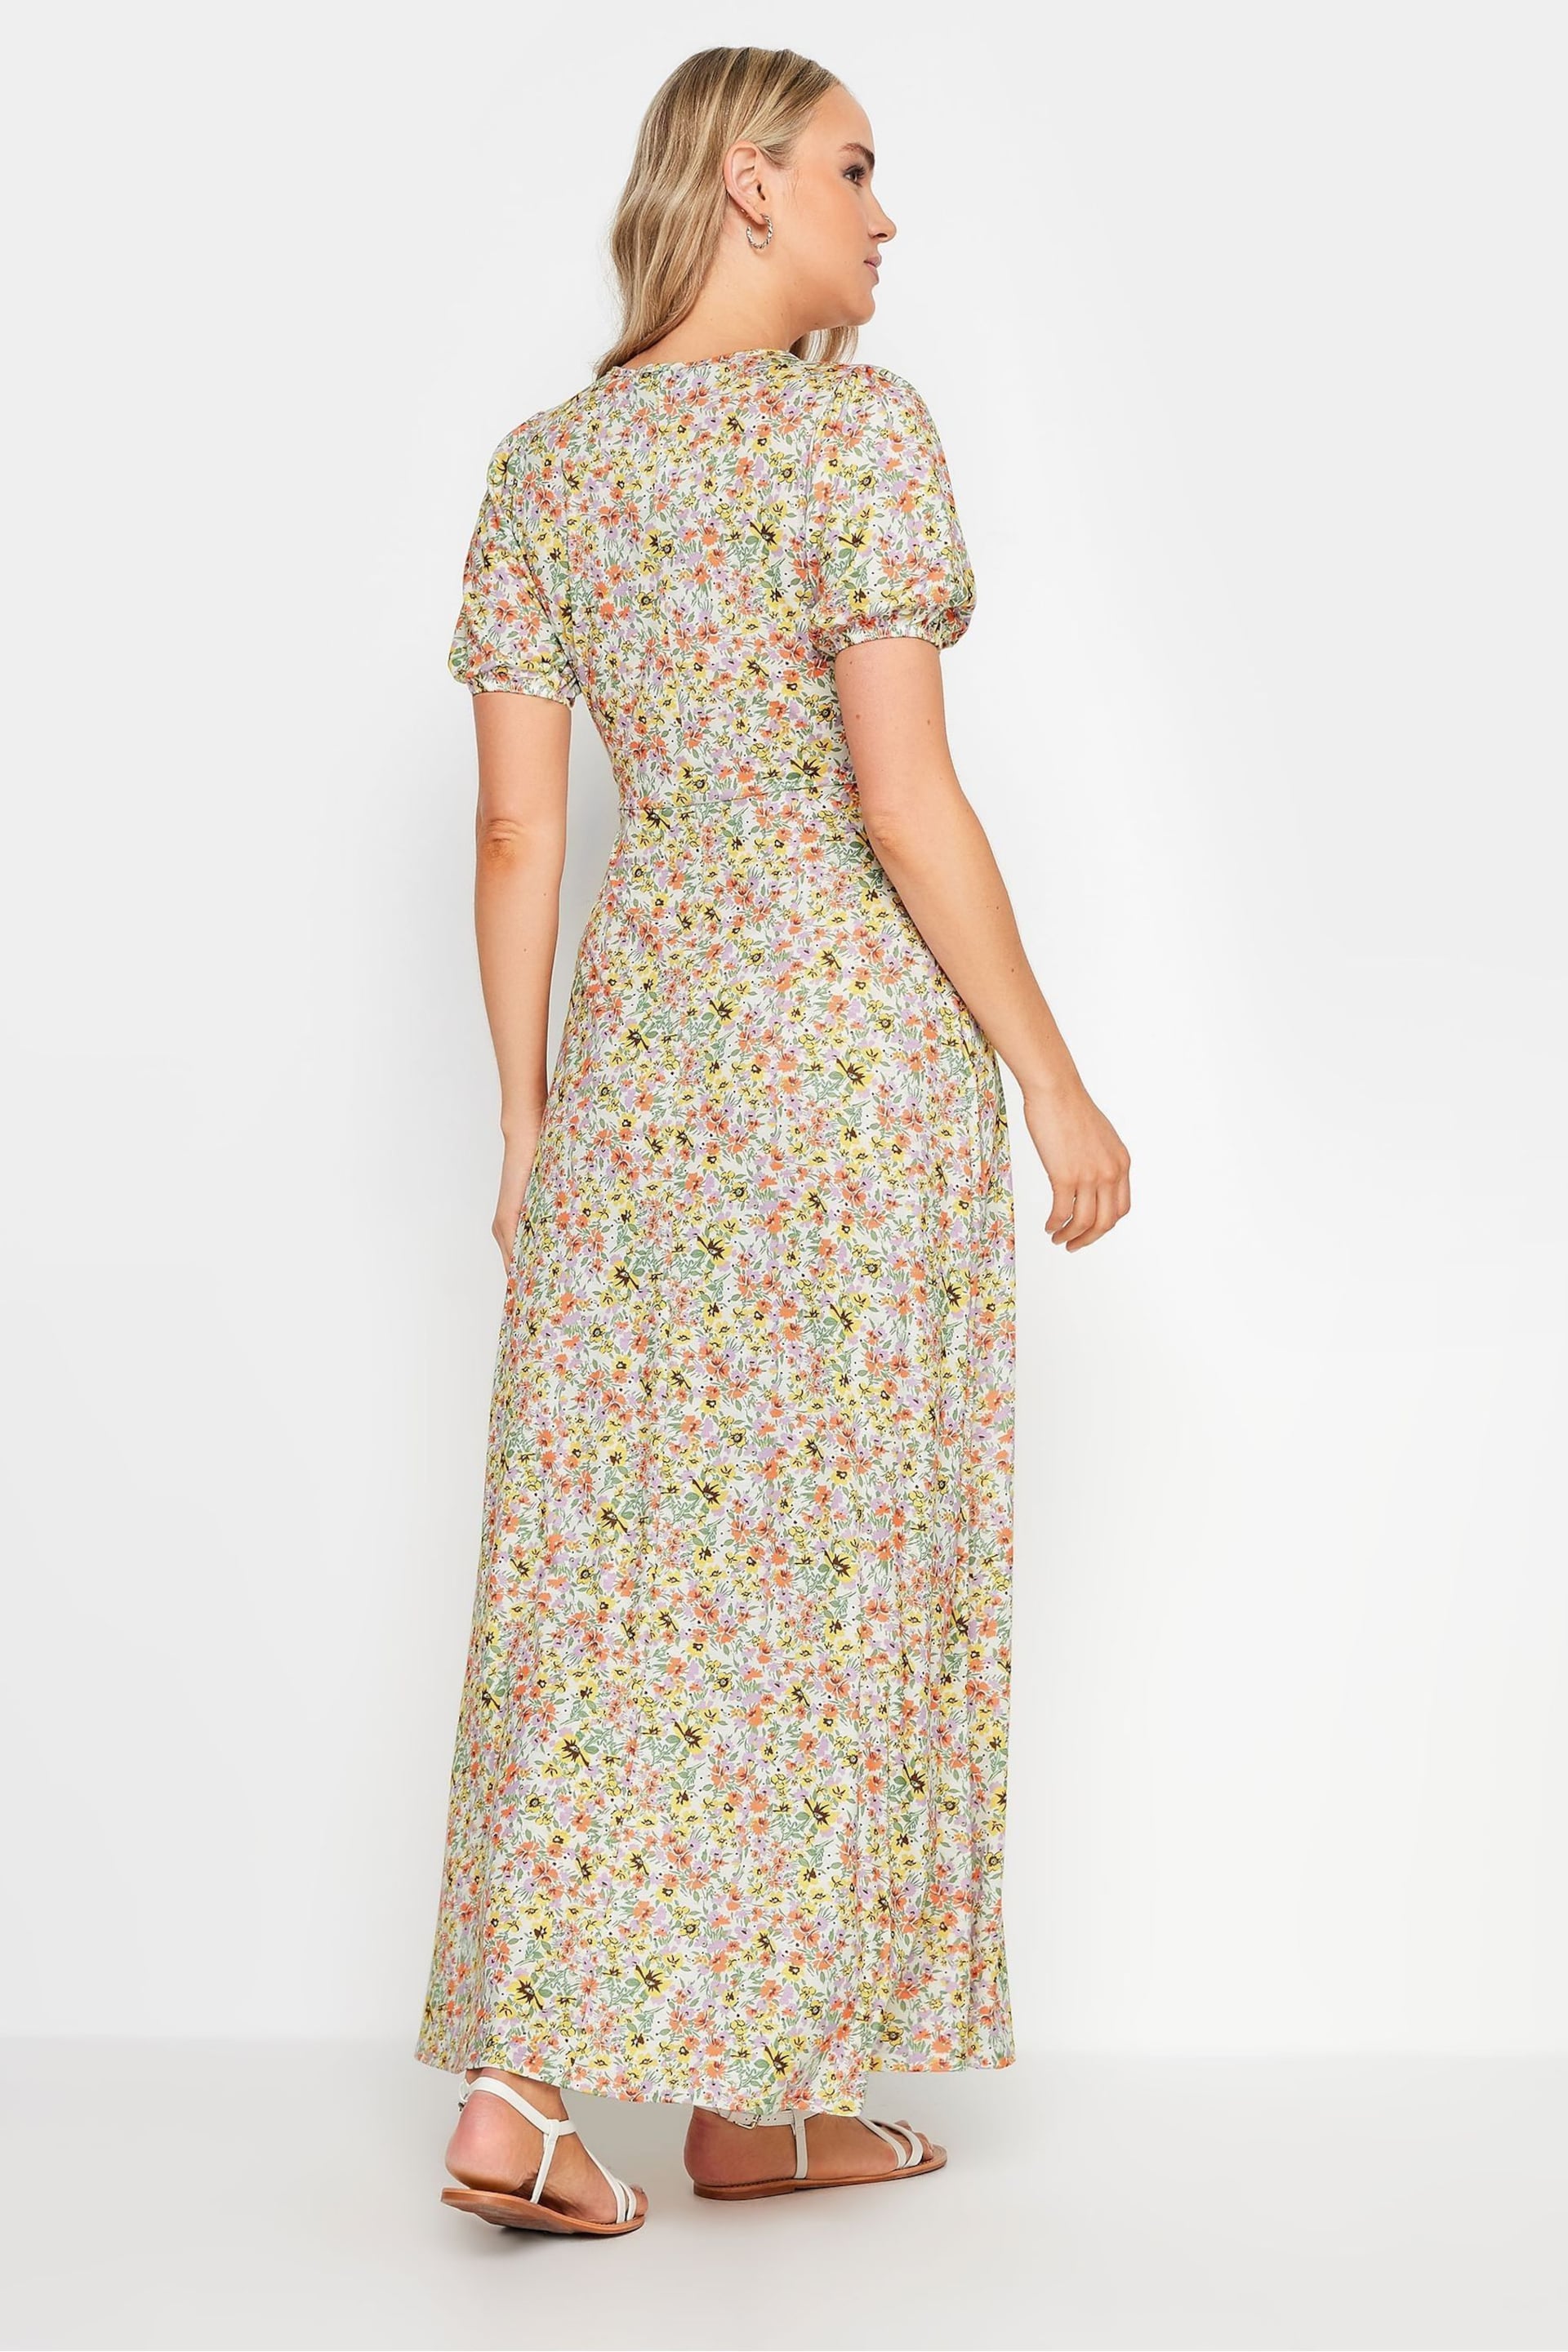 Long Tall Sally Pink Pastel Vintage Floral Wrap Maxi Dress - Image 2 of 5